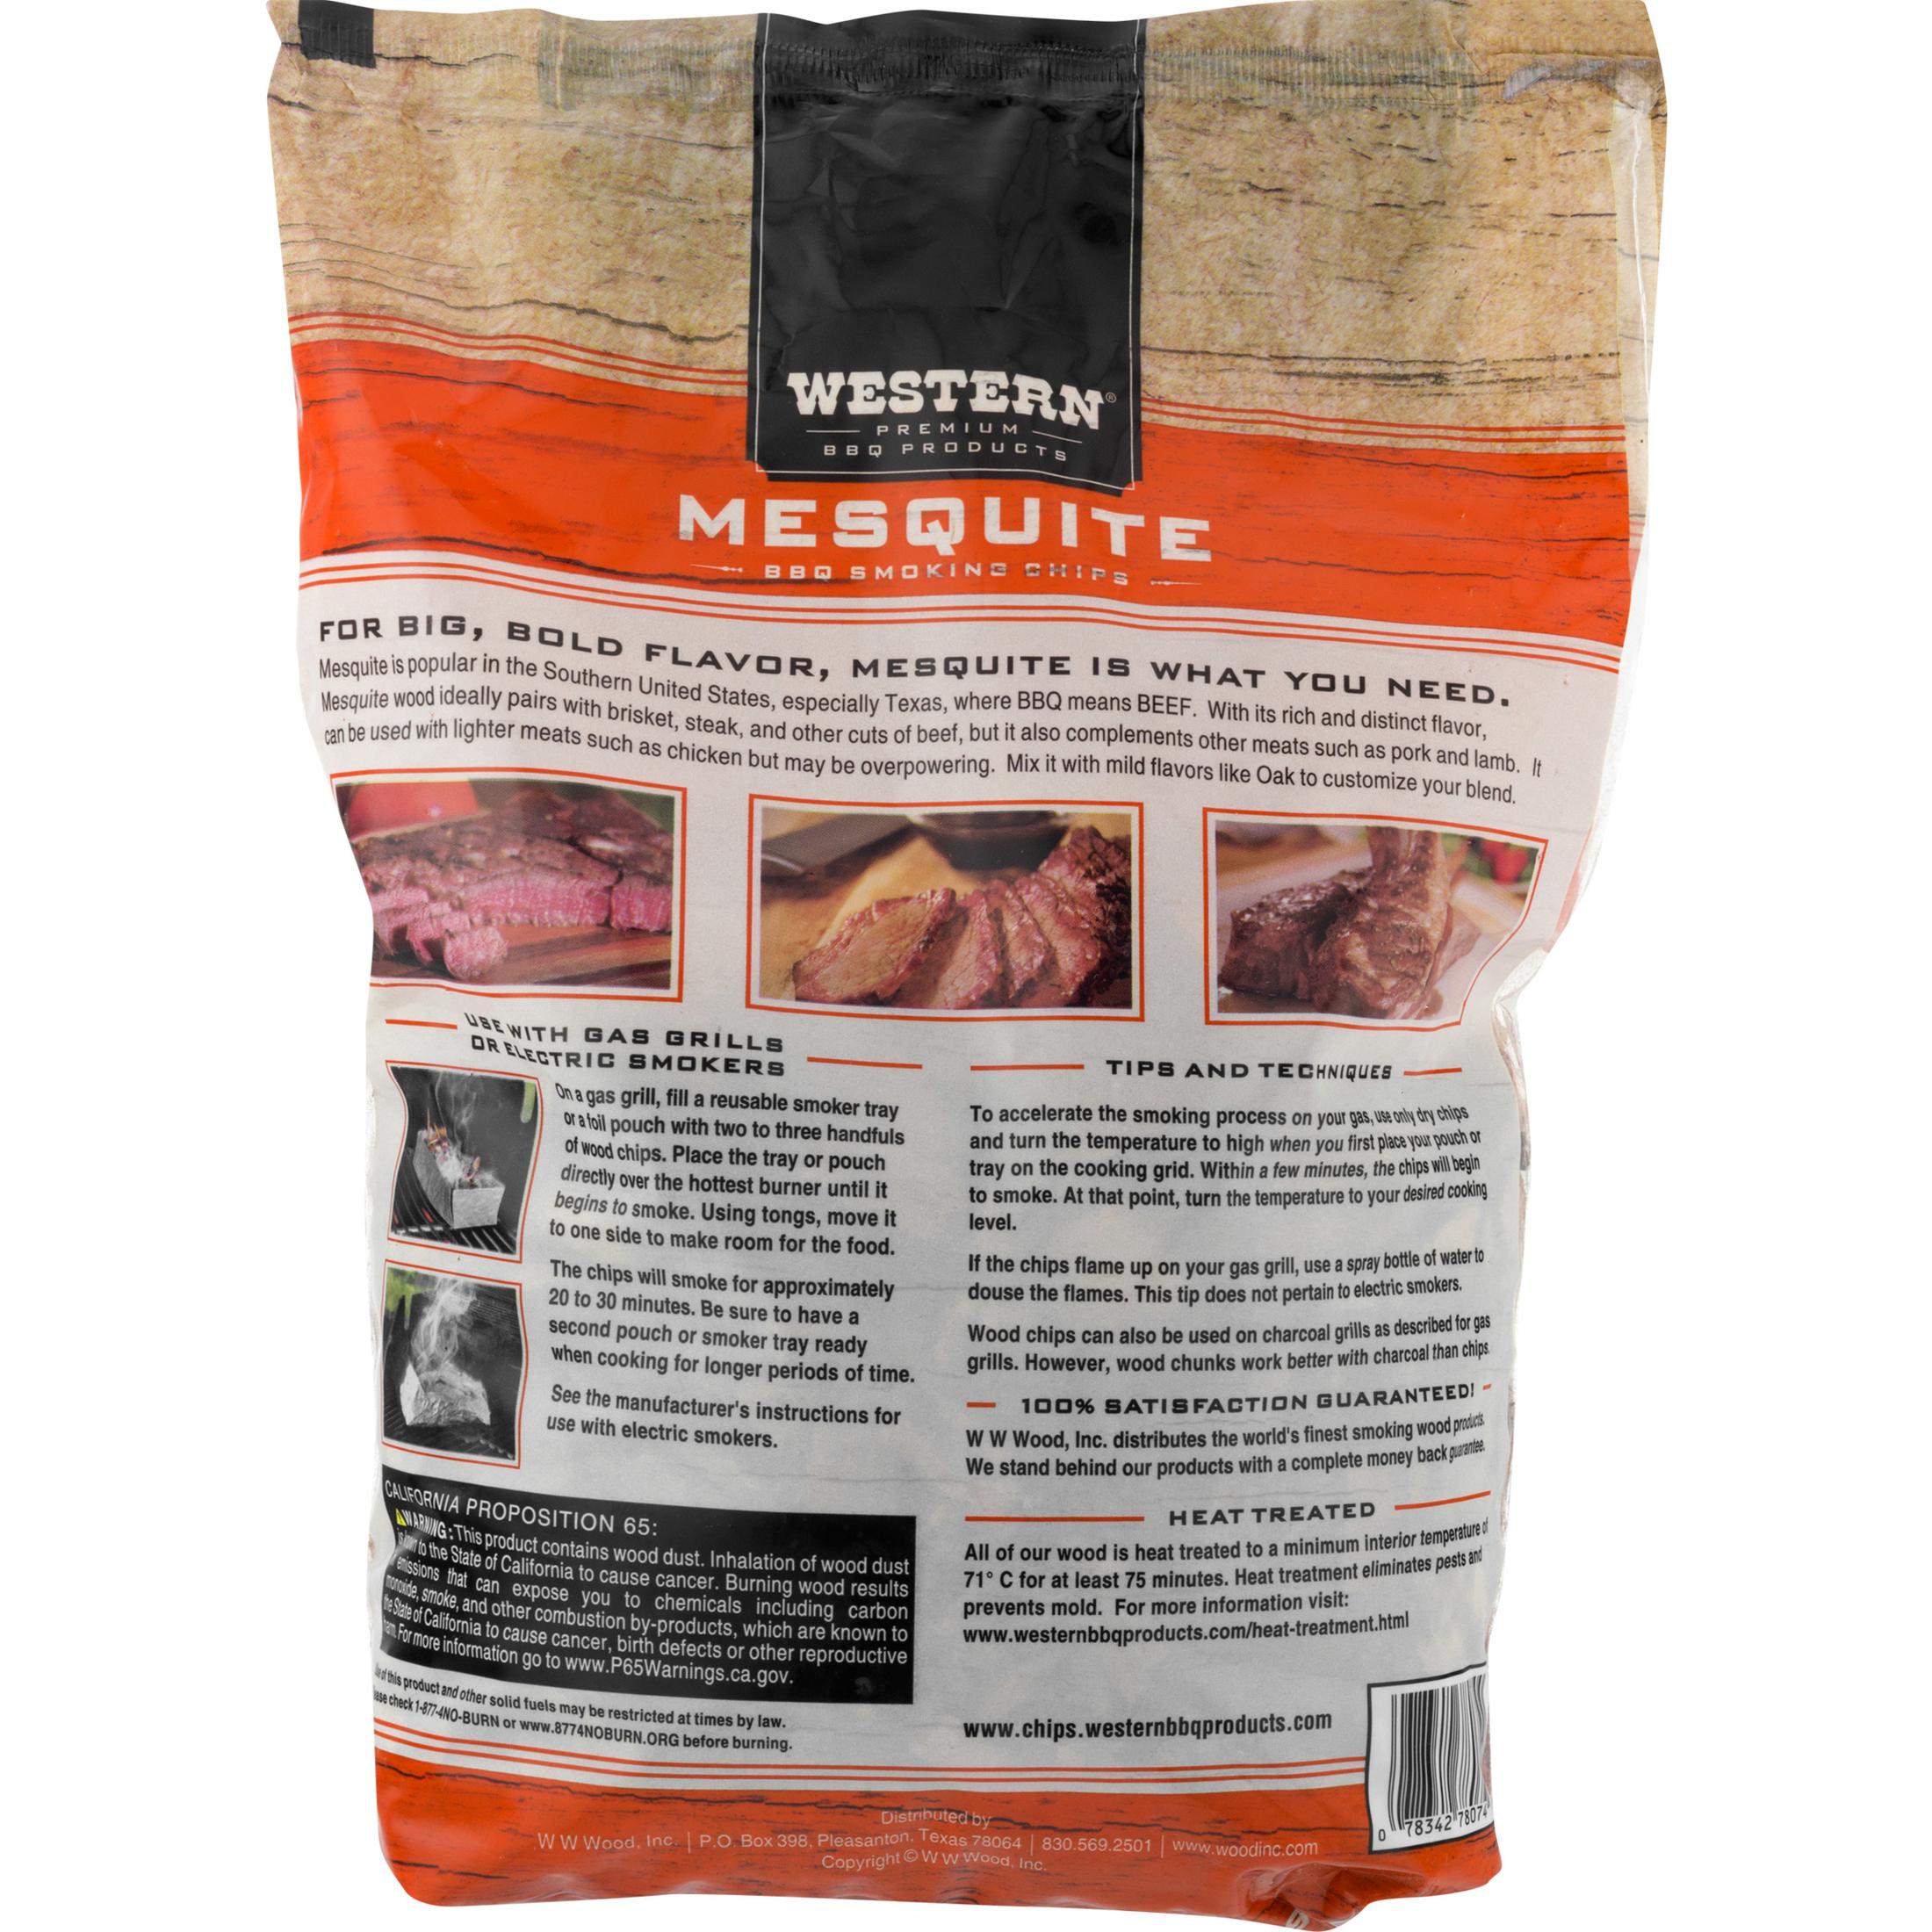 Western Premium BBQ Products Mesquite Smoking Chips, 180 Cu in - image 3 of 12